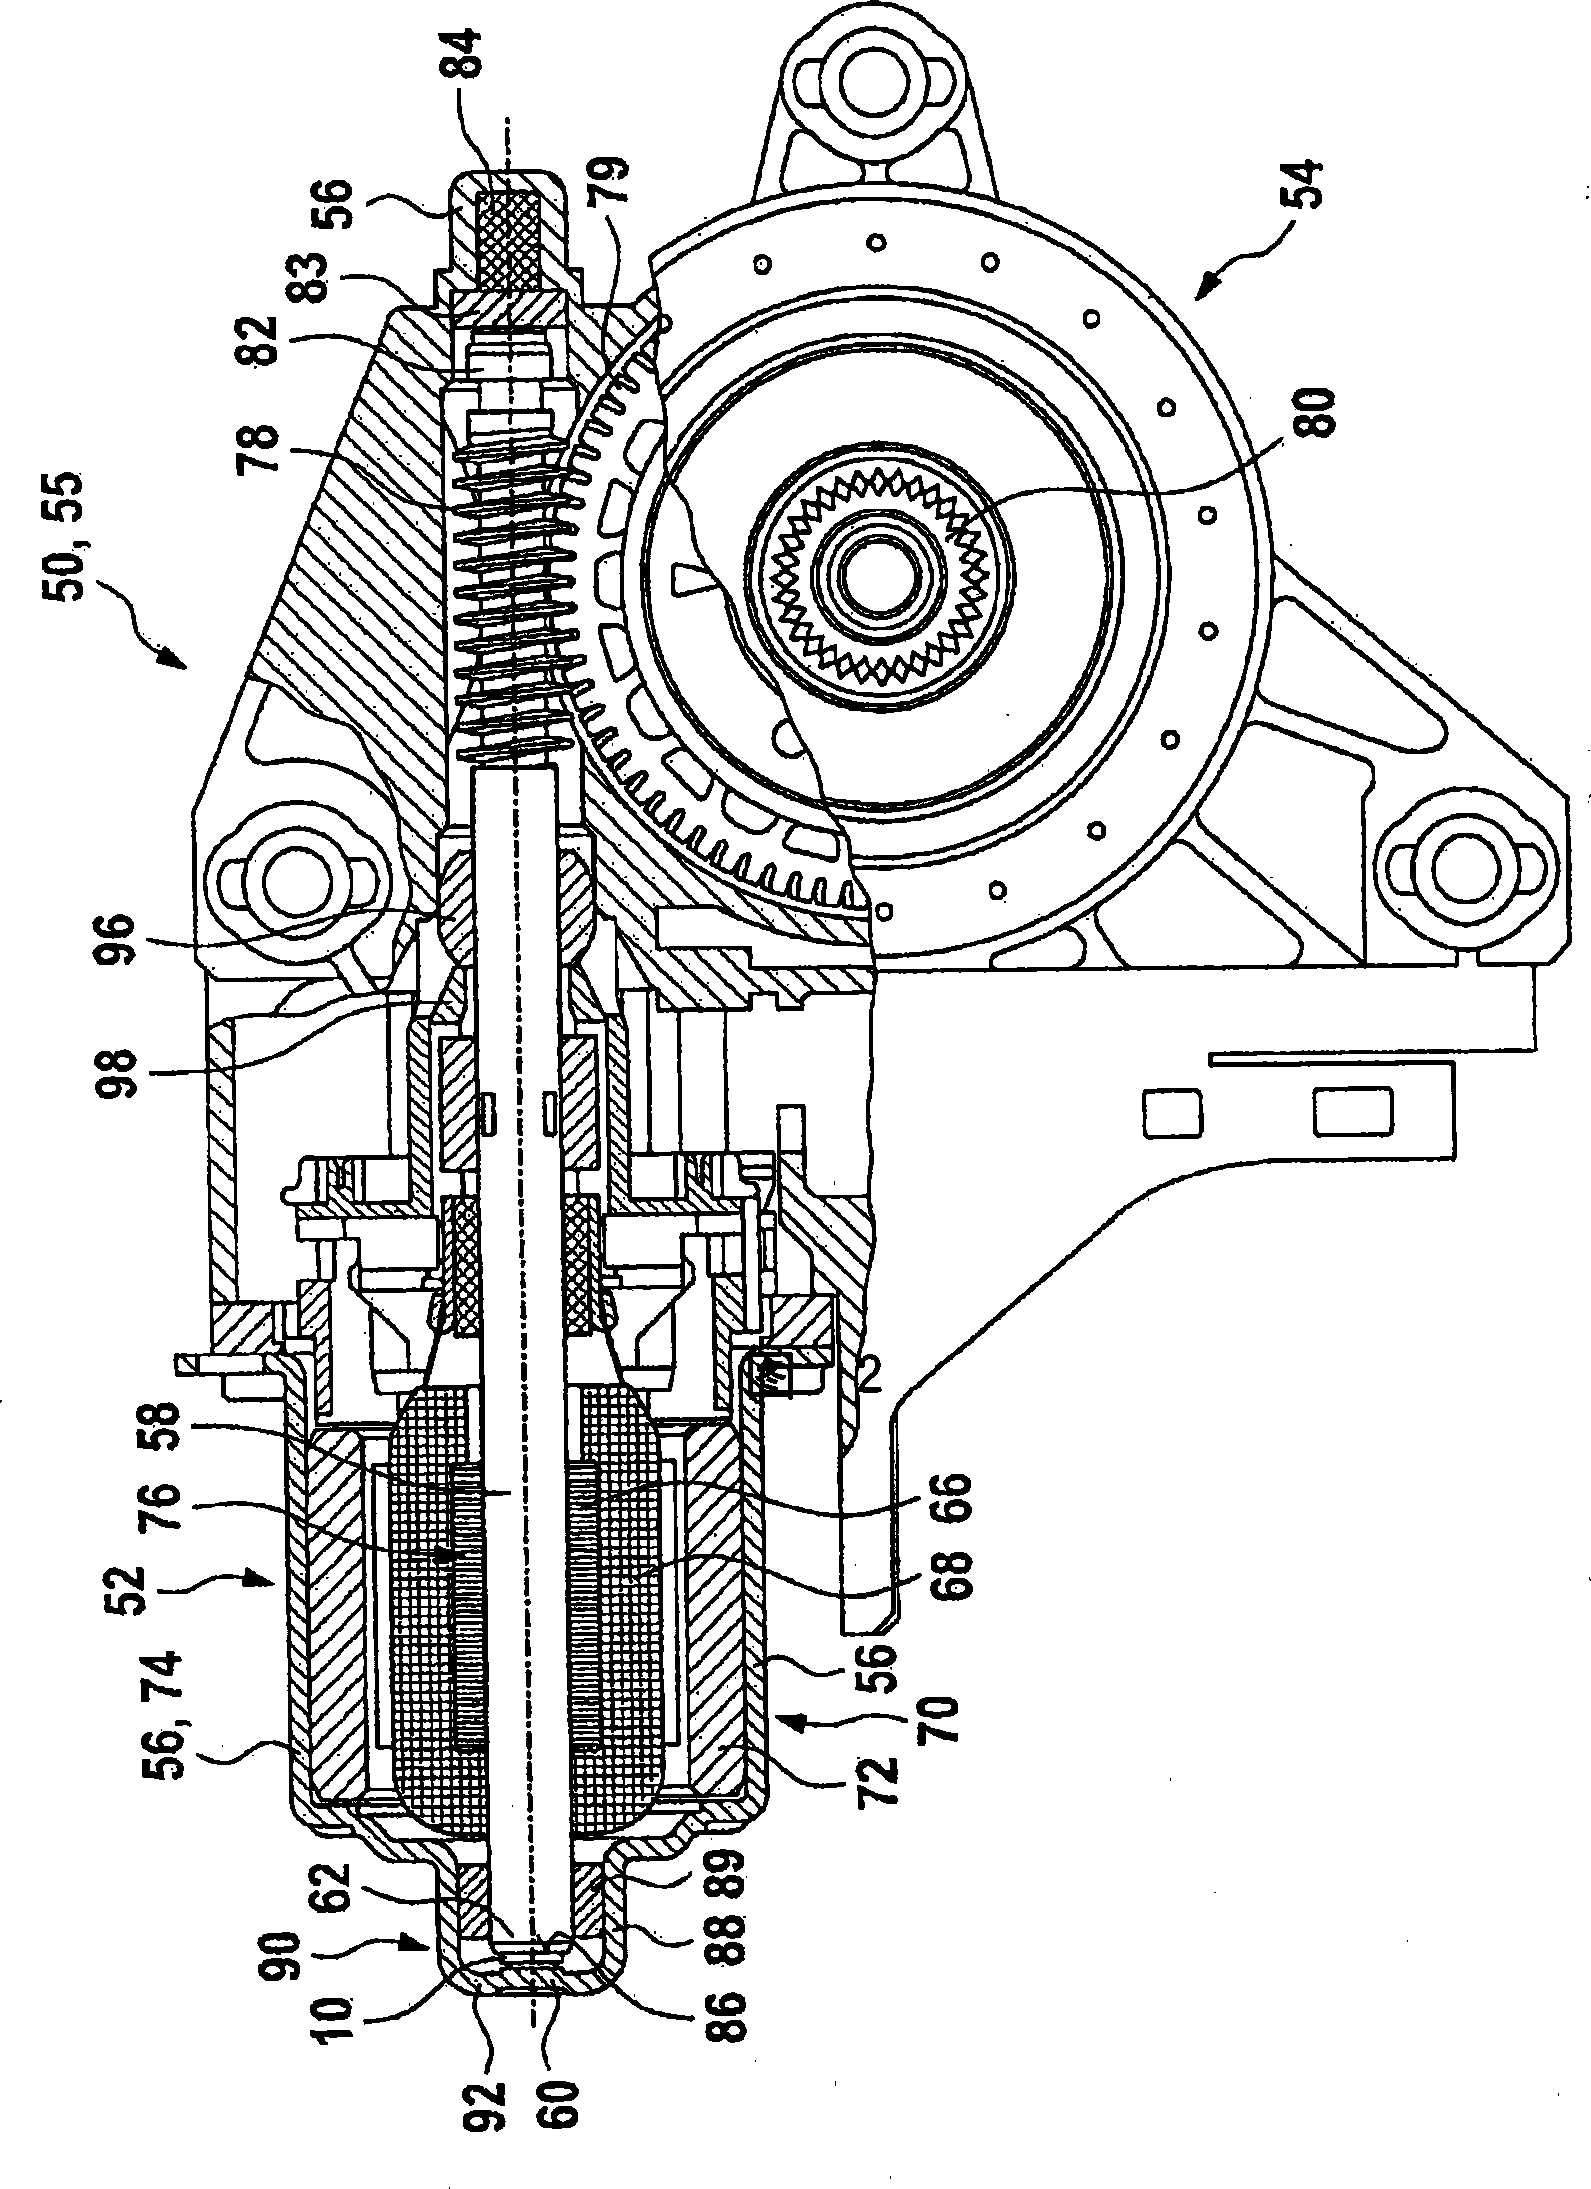 Thrust mushroom-shaped part and motor with the thrust mushroom-shaped part